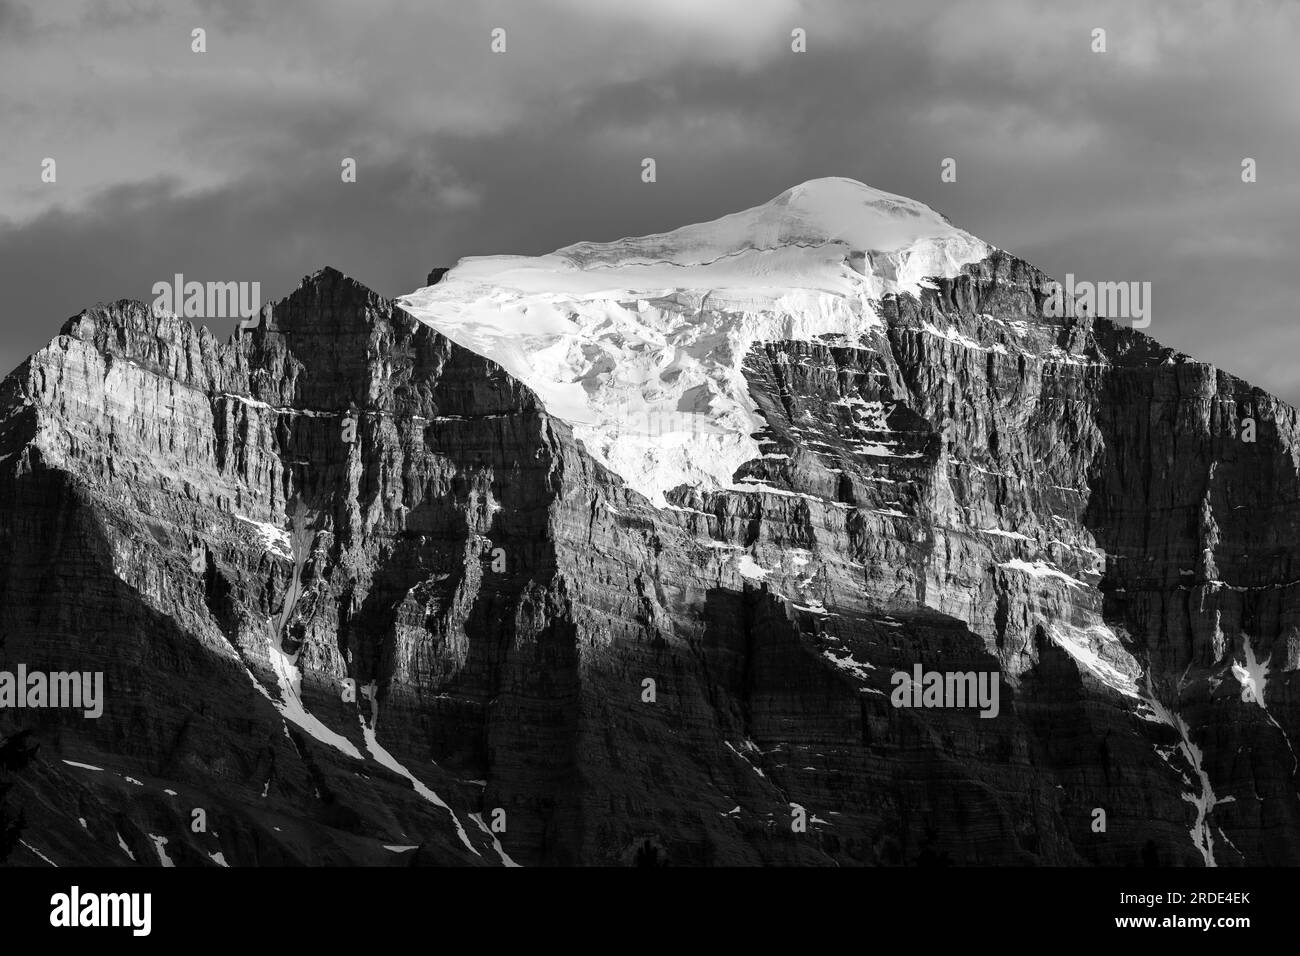 Mount Temple peak with glacier in black and white, Banff national park, Canada. Stock Photo